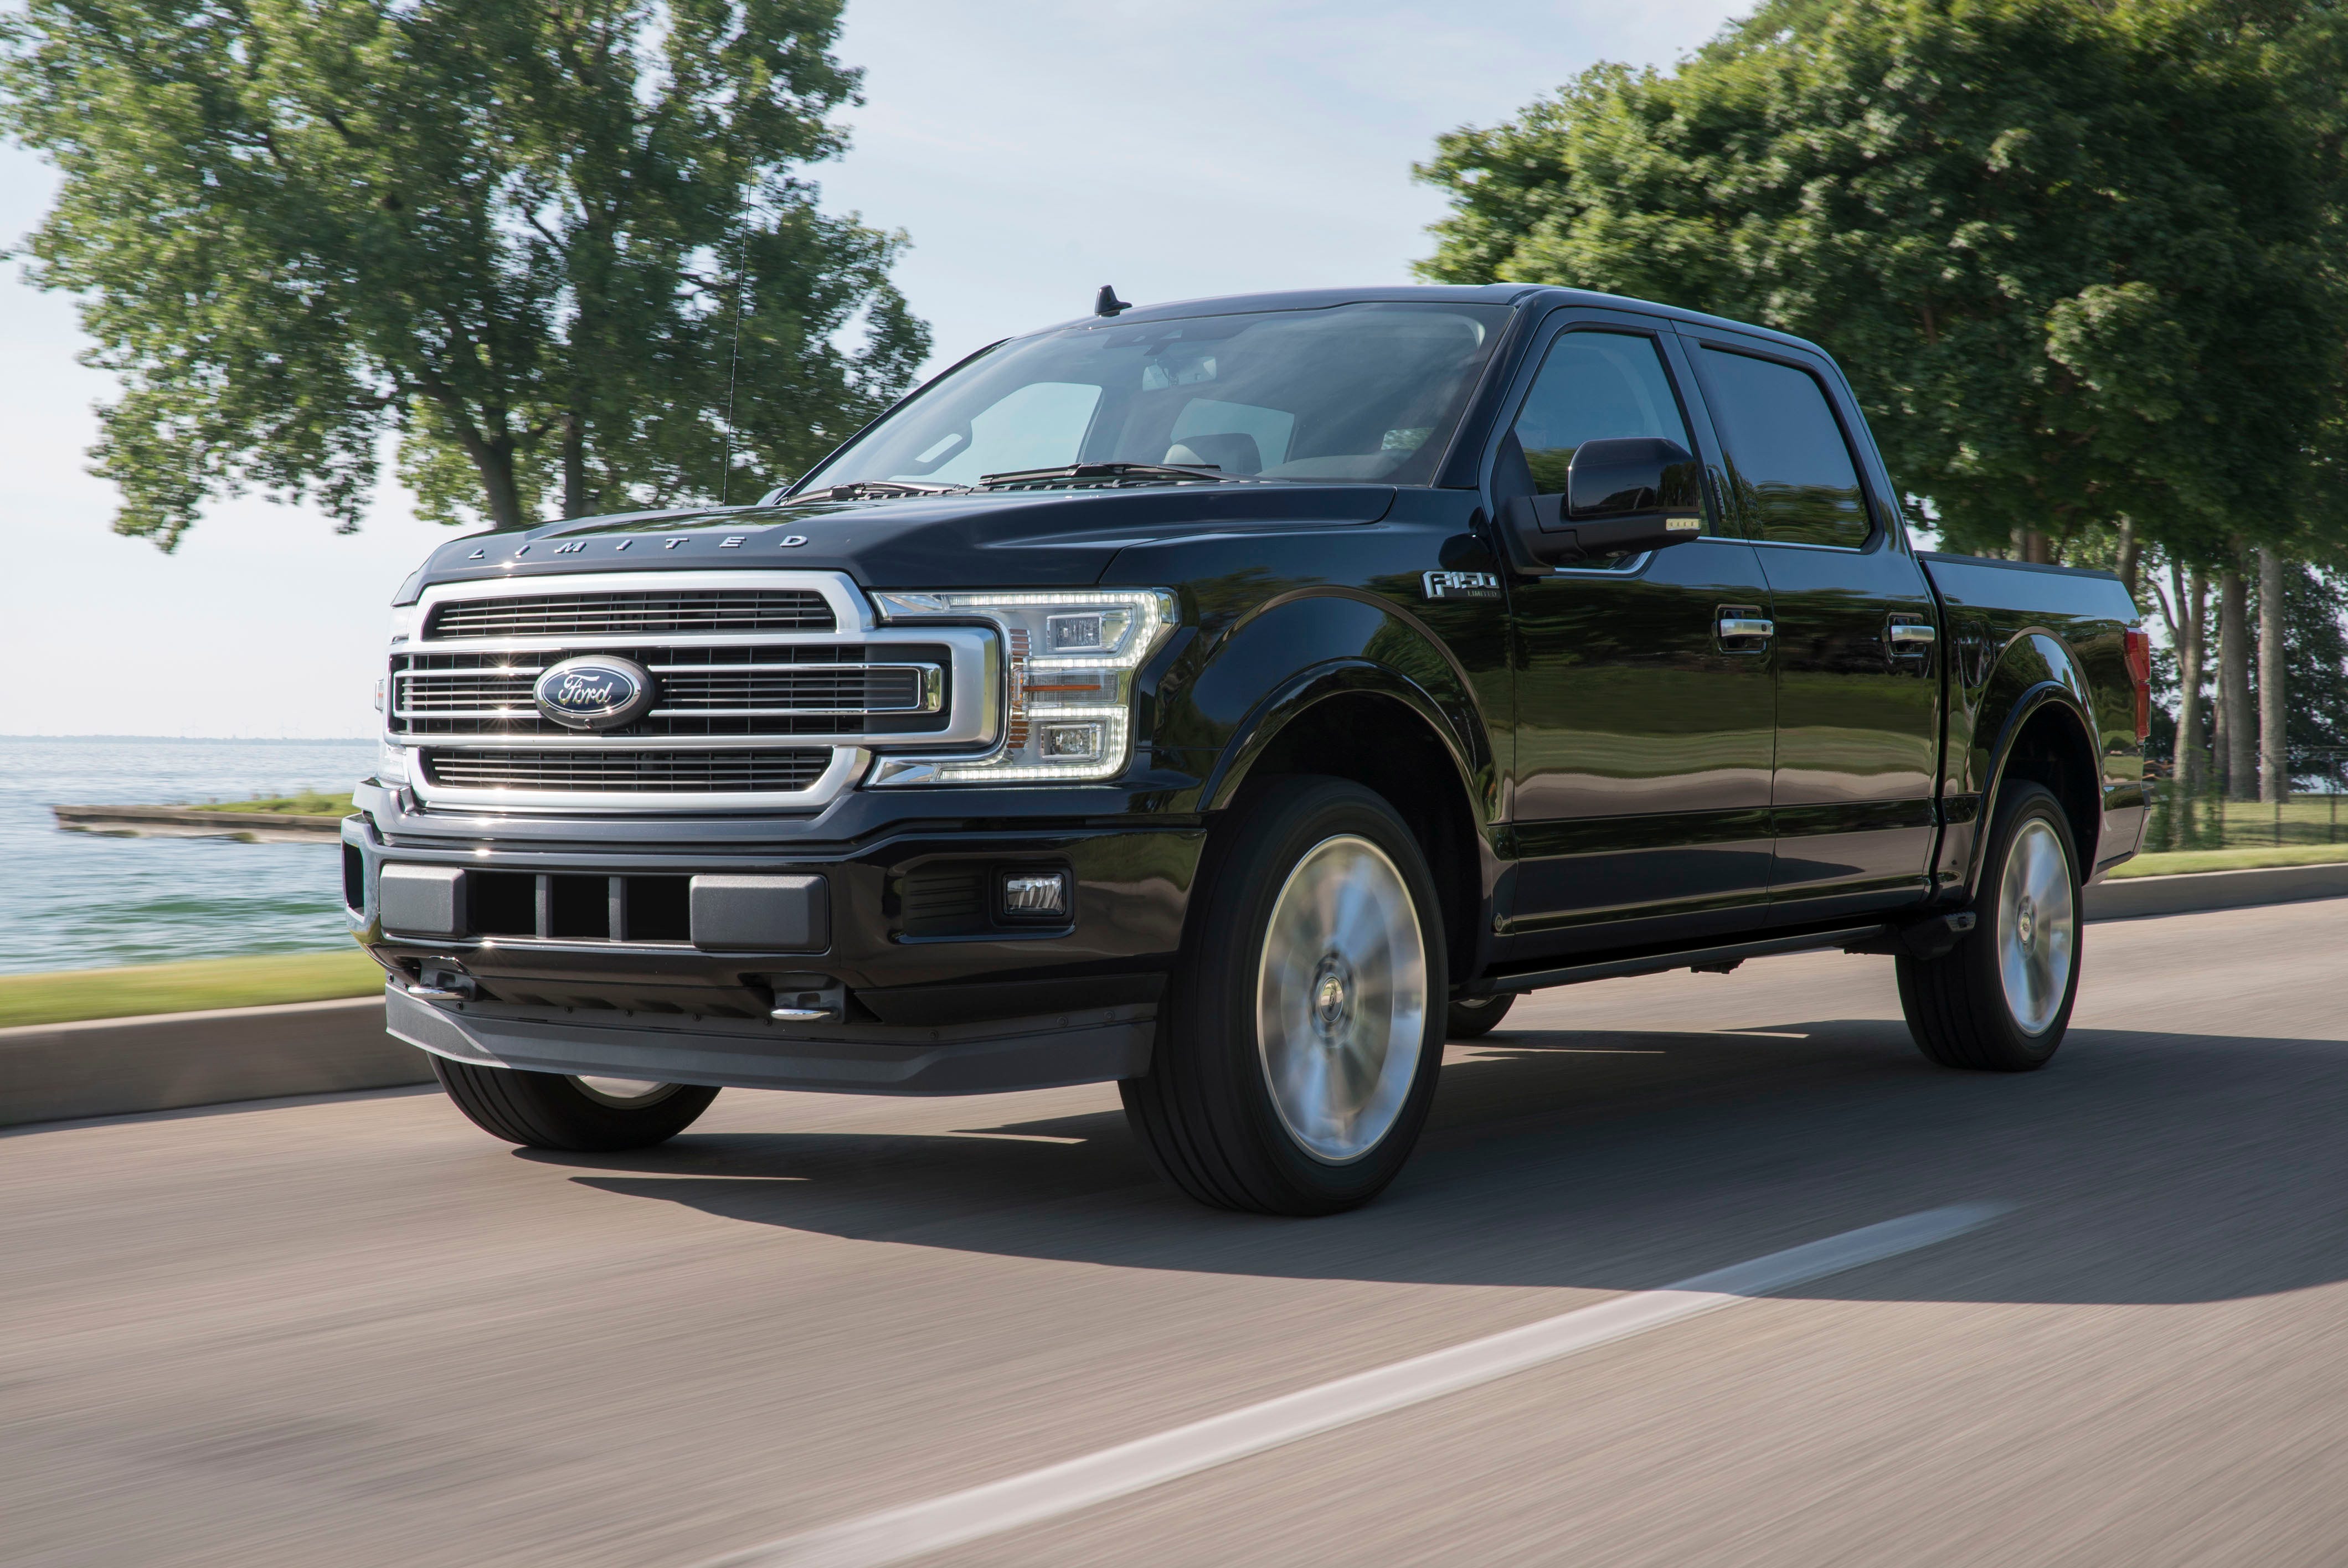 The F-Series is the best-selling pickup line in North America.